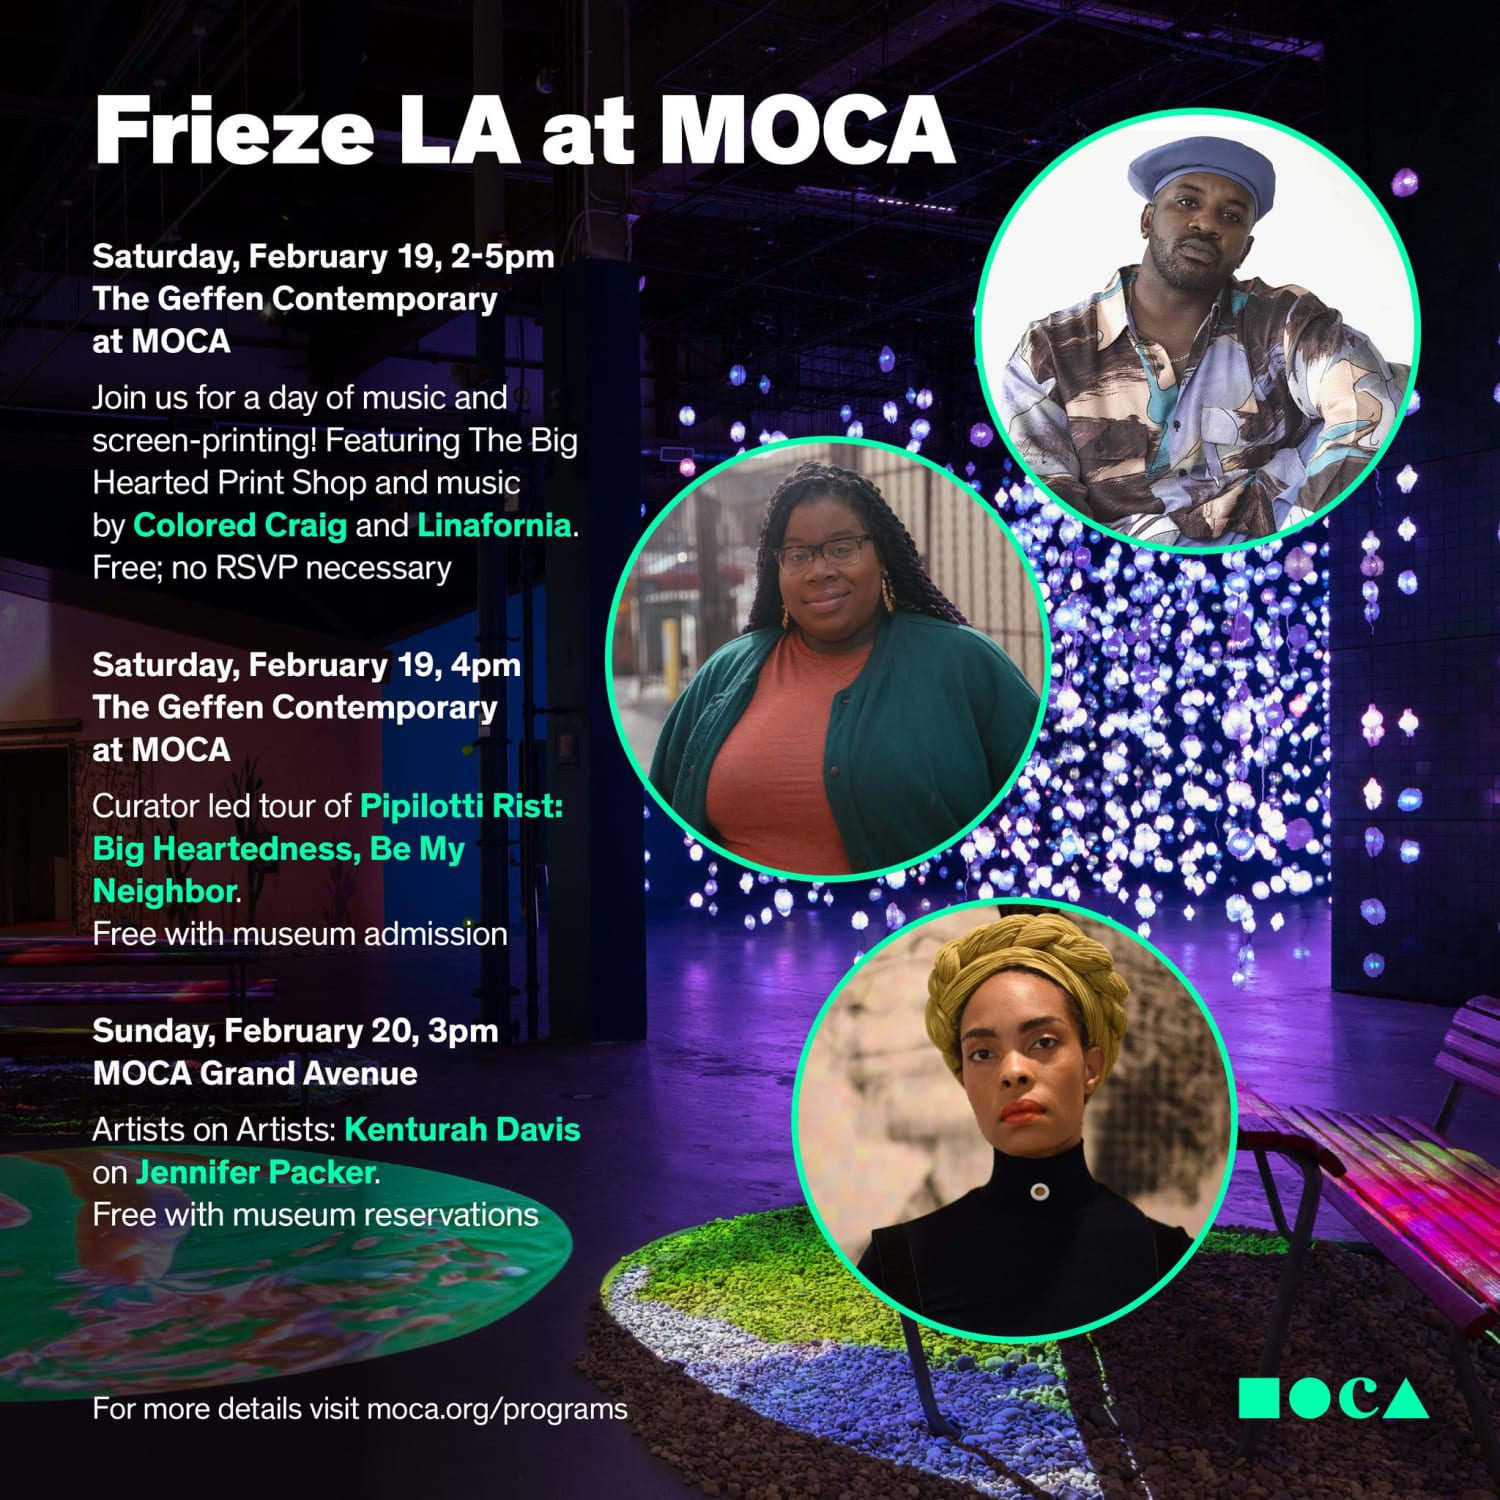 Join us this weekend for FriezeLA at MOCA! Saturday - The Geffen will host outdoor music, food trucks & a screen printing workshop plus a tour of the Pipilotti Rist show. Sunday - artist Kenturah Davis will give a talk on Jennifer Packer. More info at